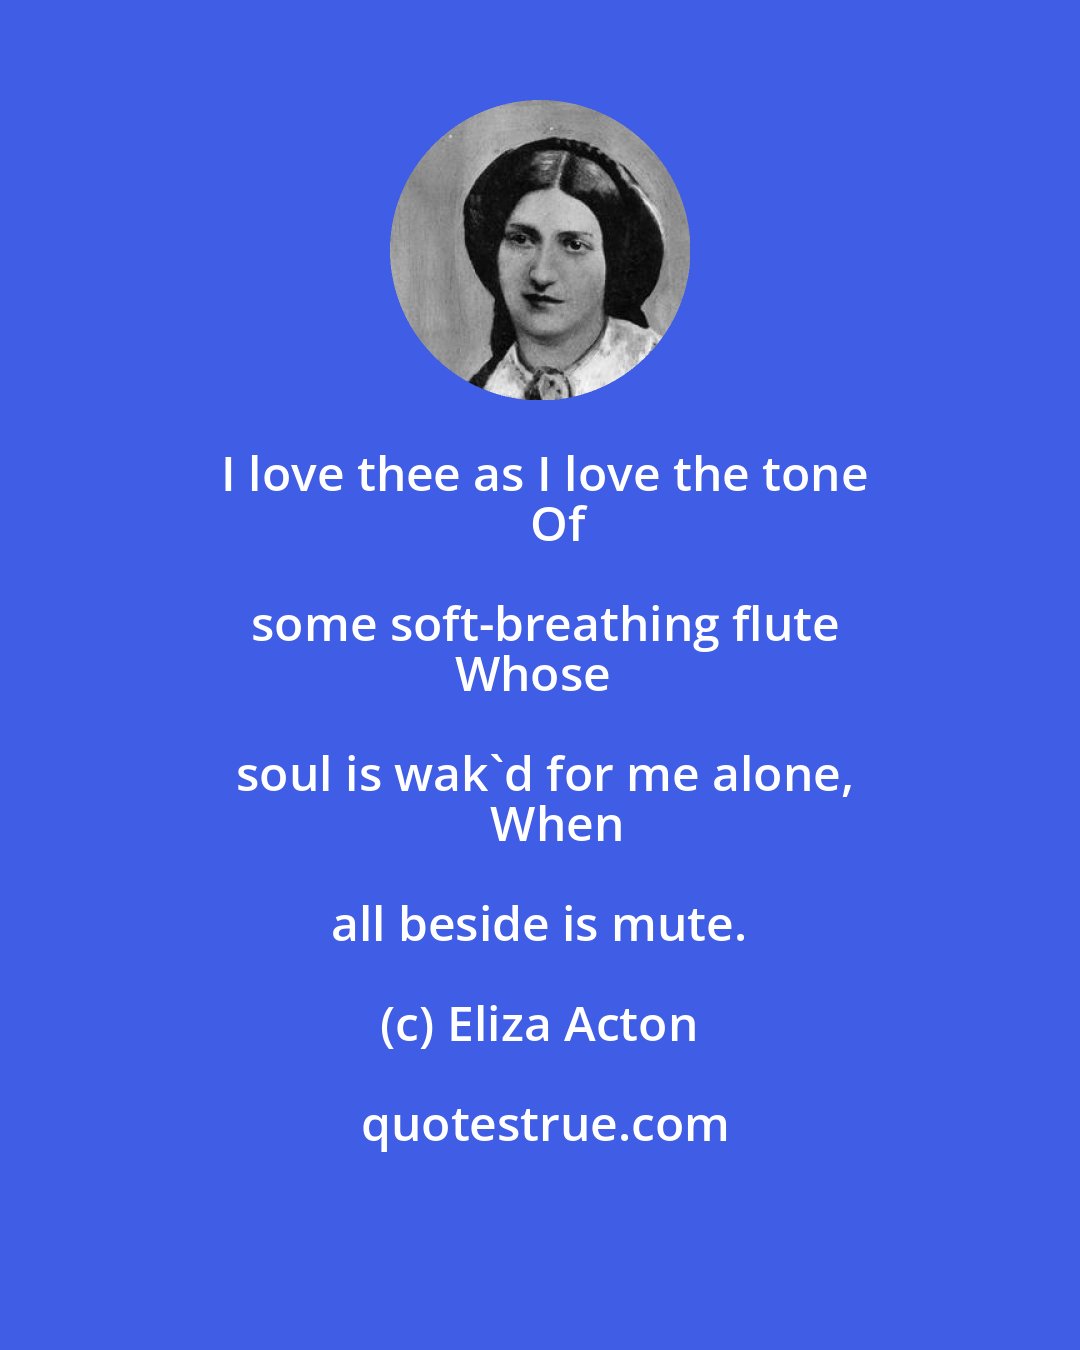 Eliza Acton: I love thee as I love the tone
    Of some soft-breathing flute
Whose soul is wak'd for me alone,
    When all beside is mute.